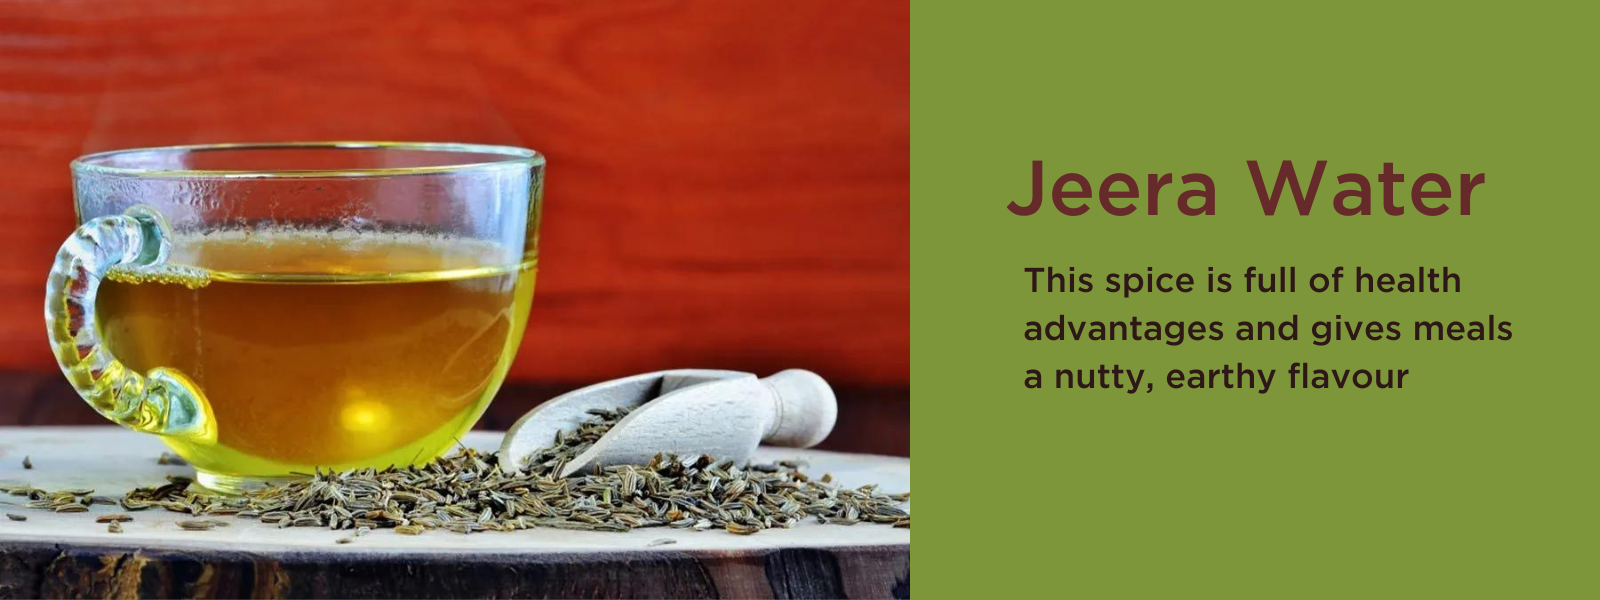 Jeera water - Health Benefits, Uses and Important Facts